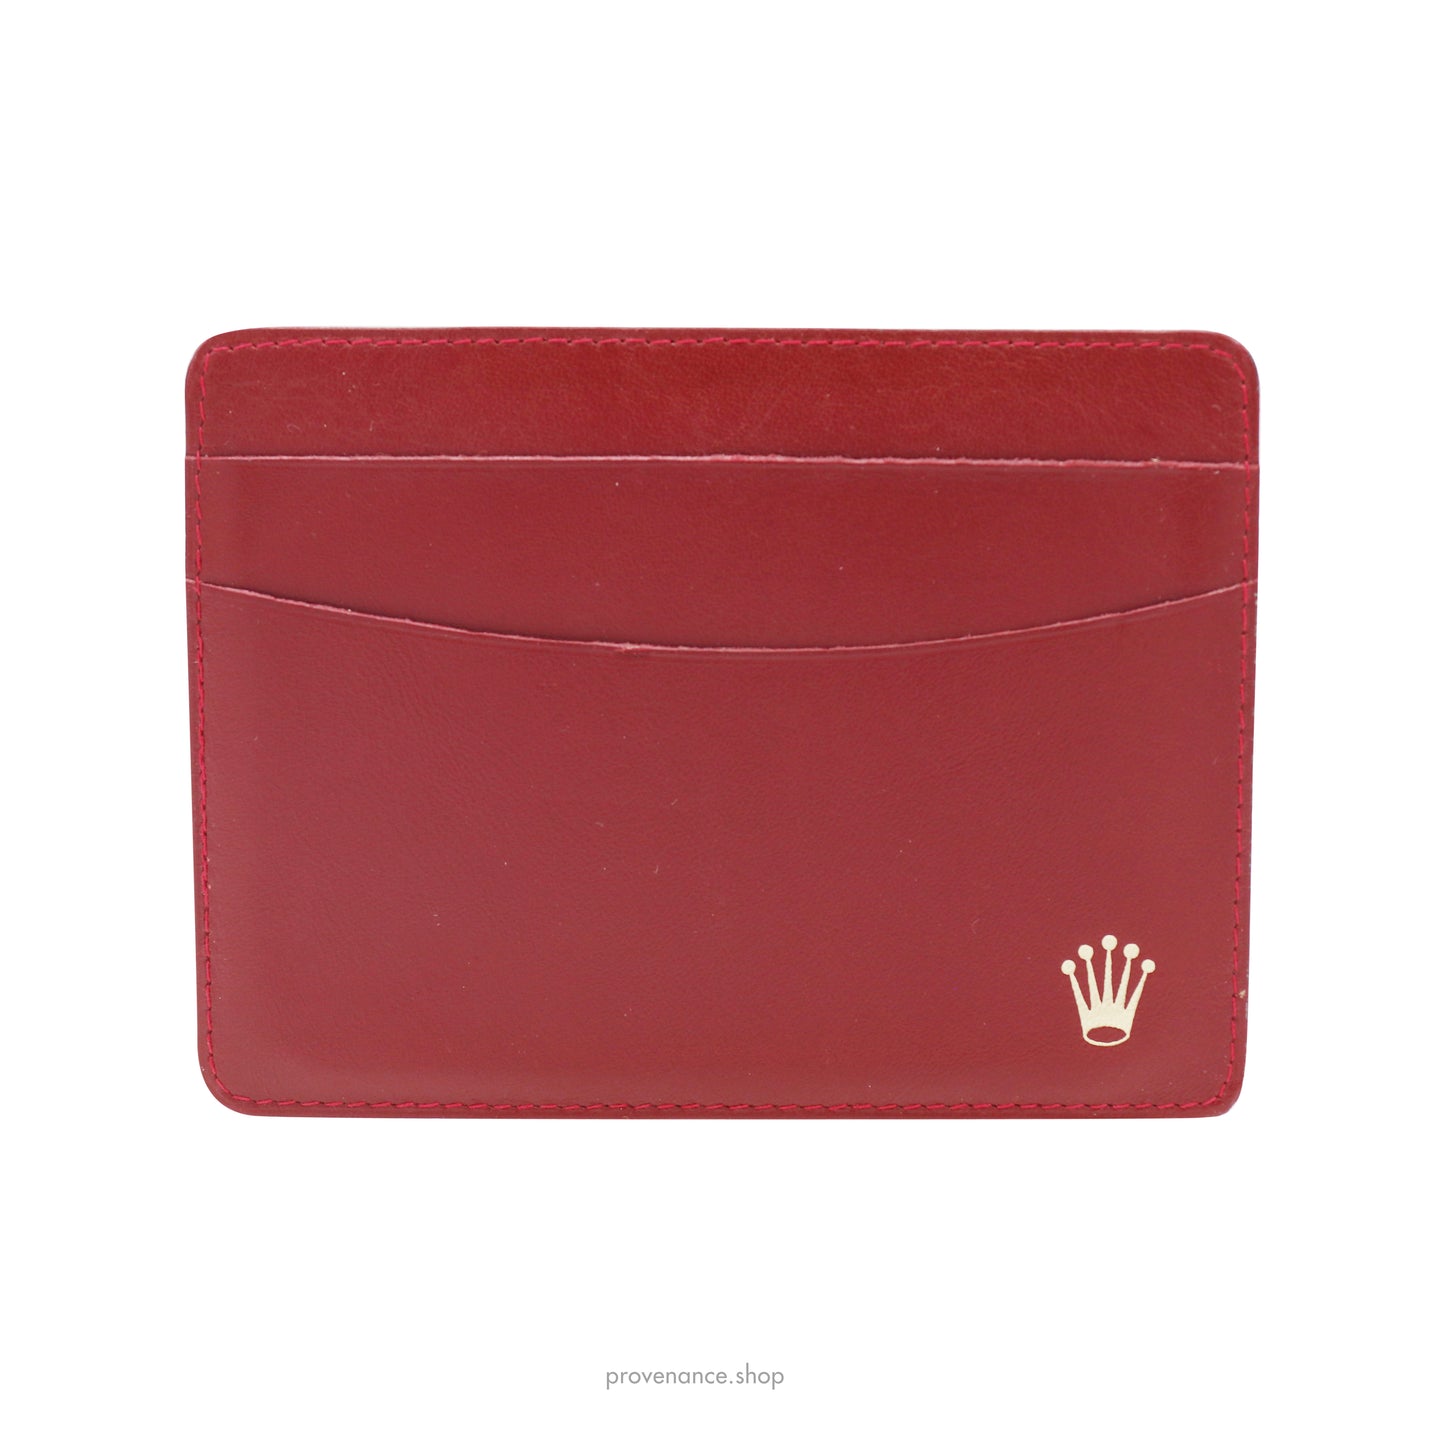 Rolex Card Holder Wallet - Red Leather